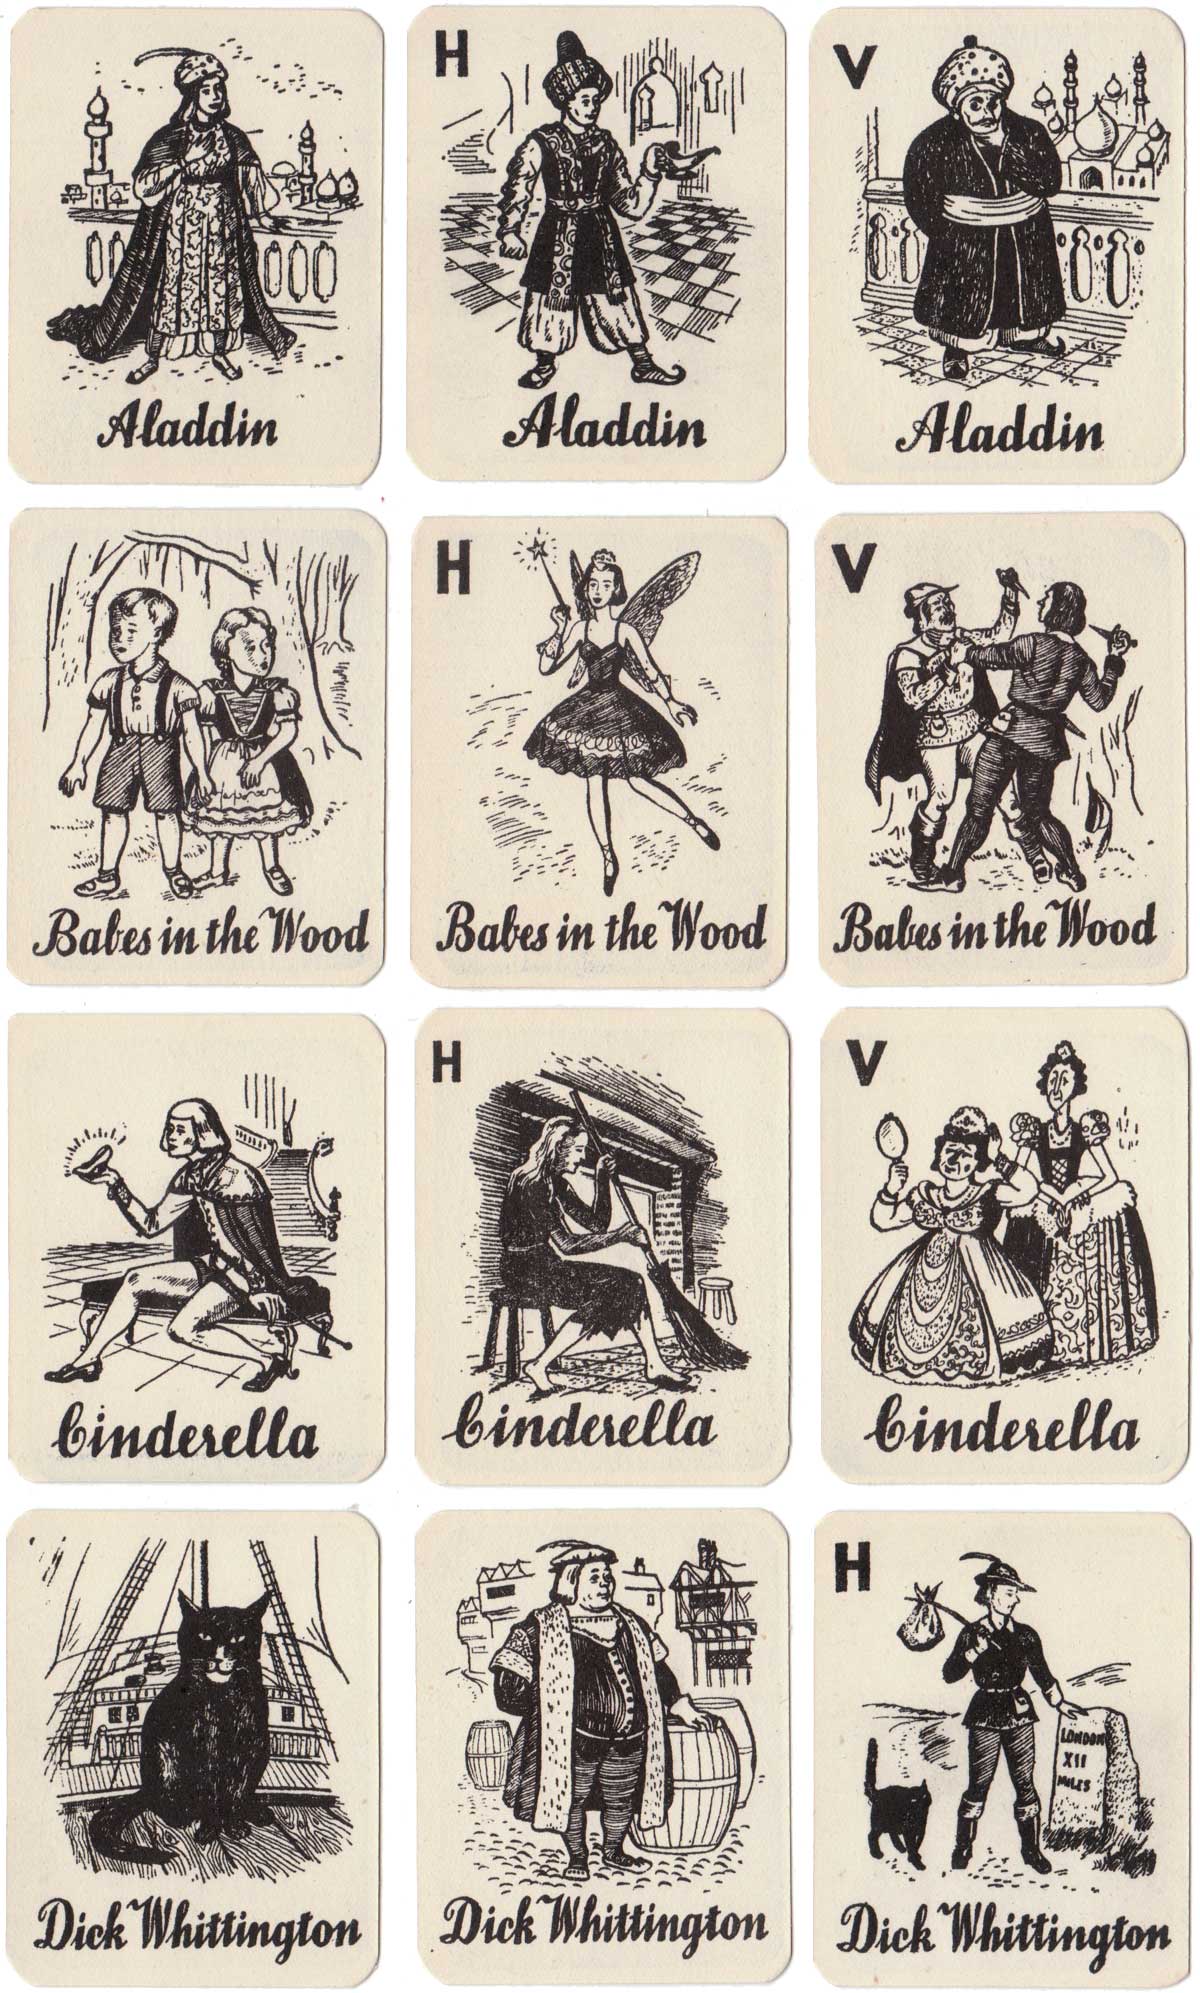 Panto People published by E. S. & A. Robinson, c.1930s